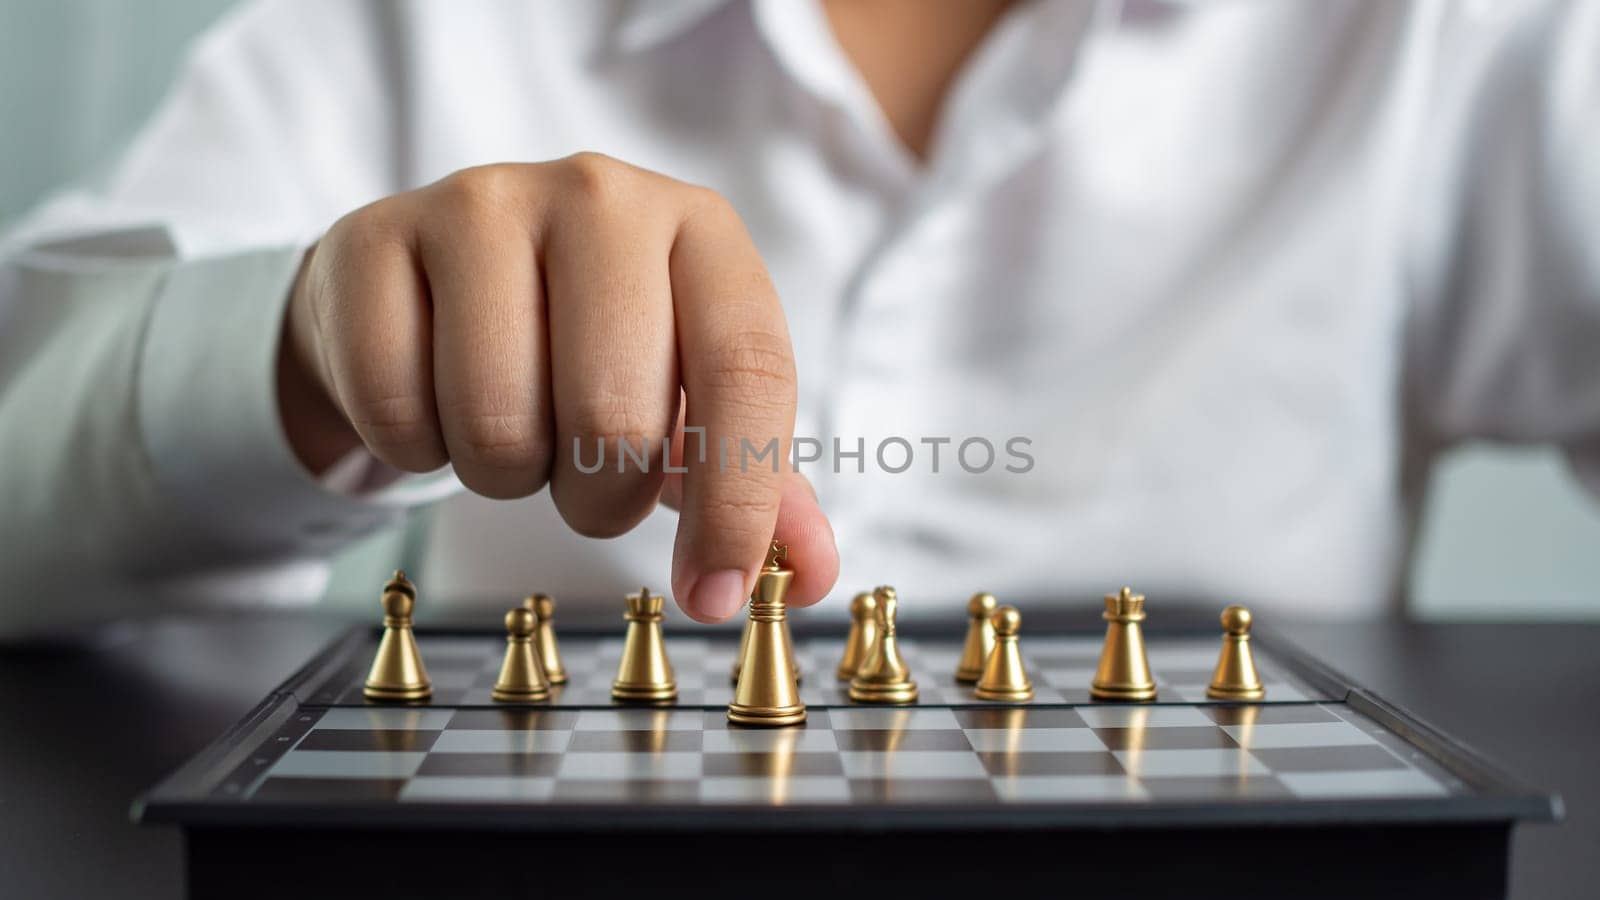 Businessman holding a king on a chess board to move forward and start the game represents Strategic planning and business planning by Unimages2527